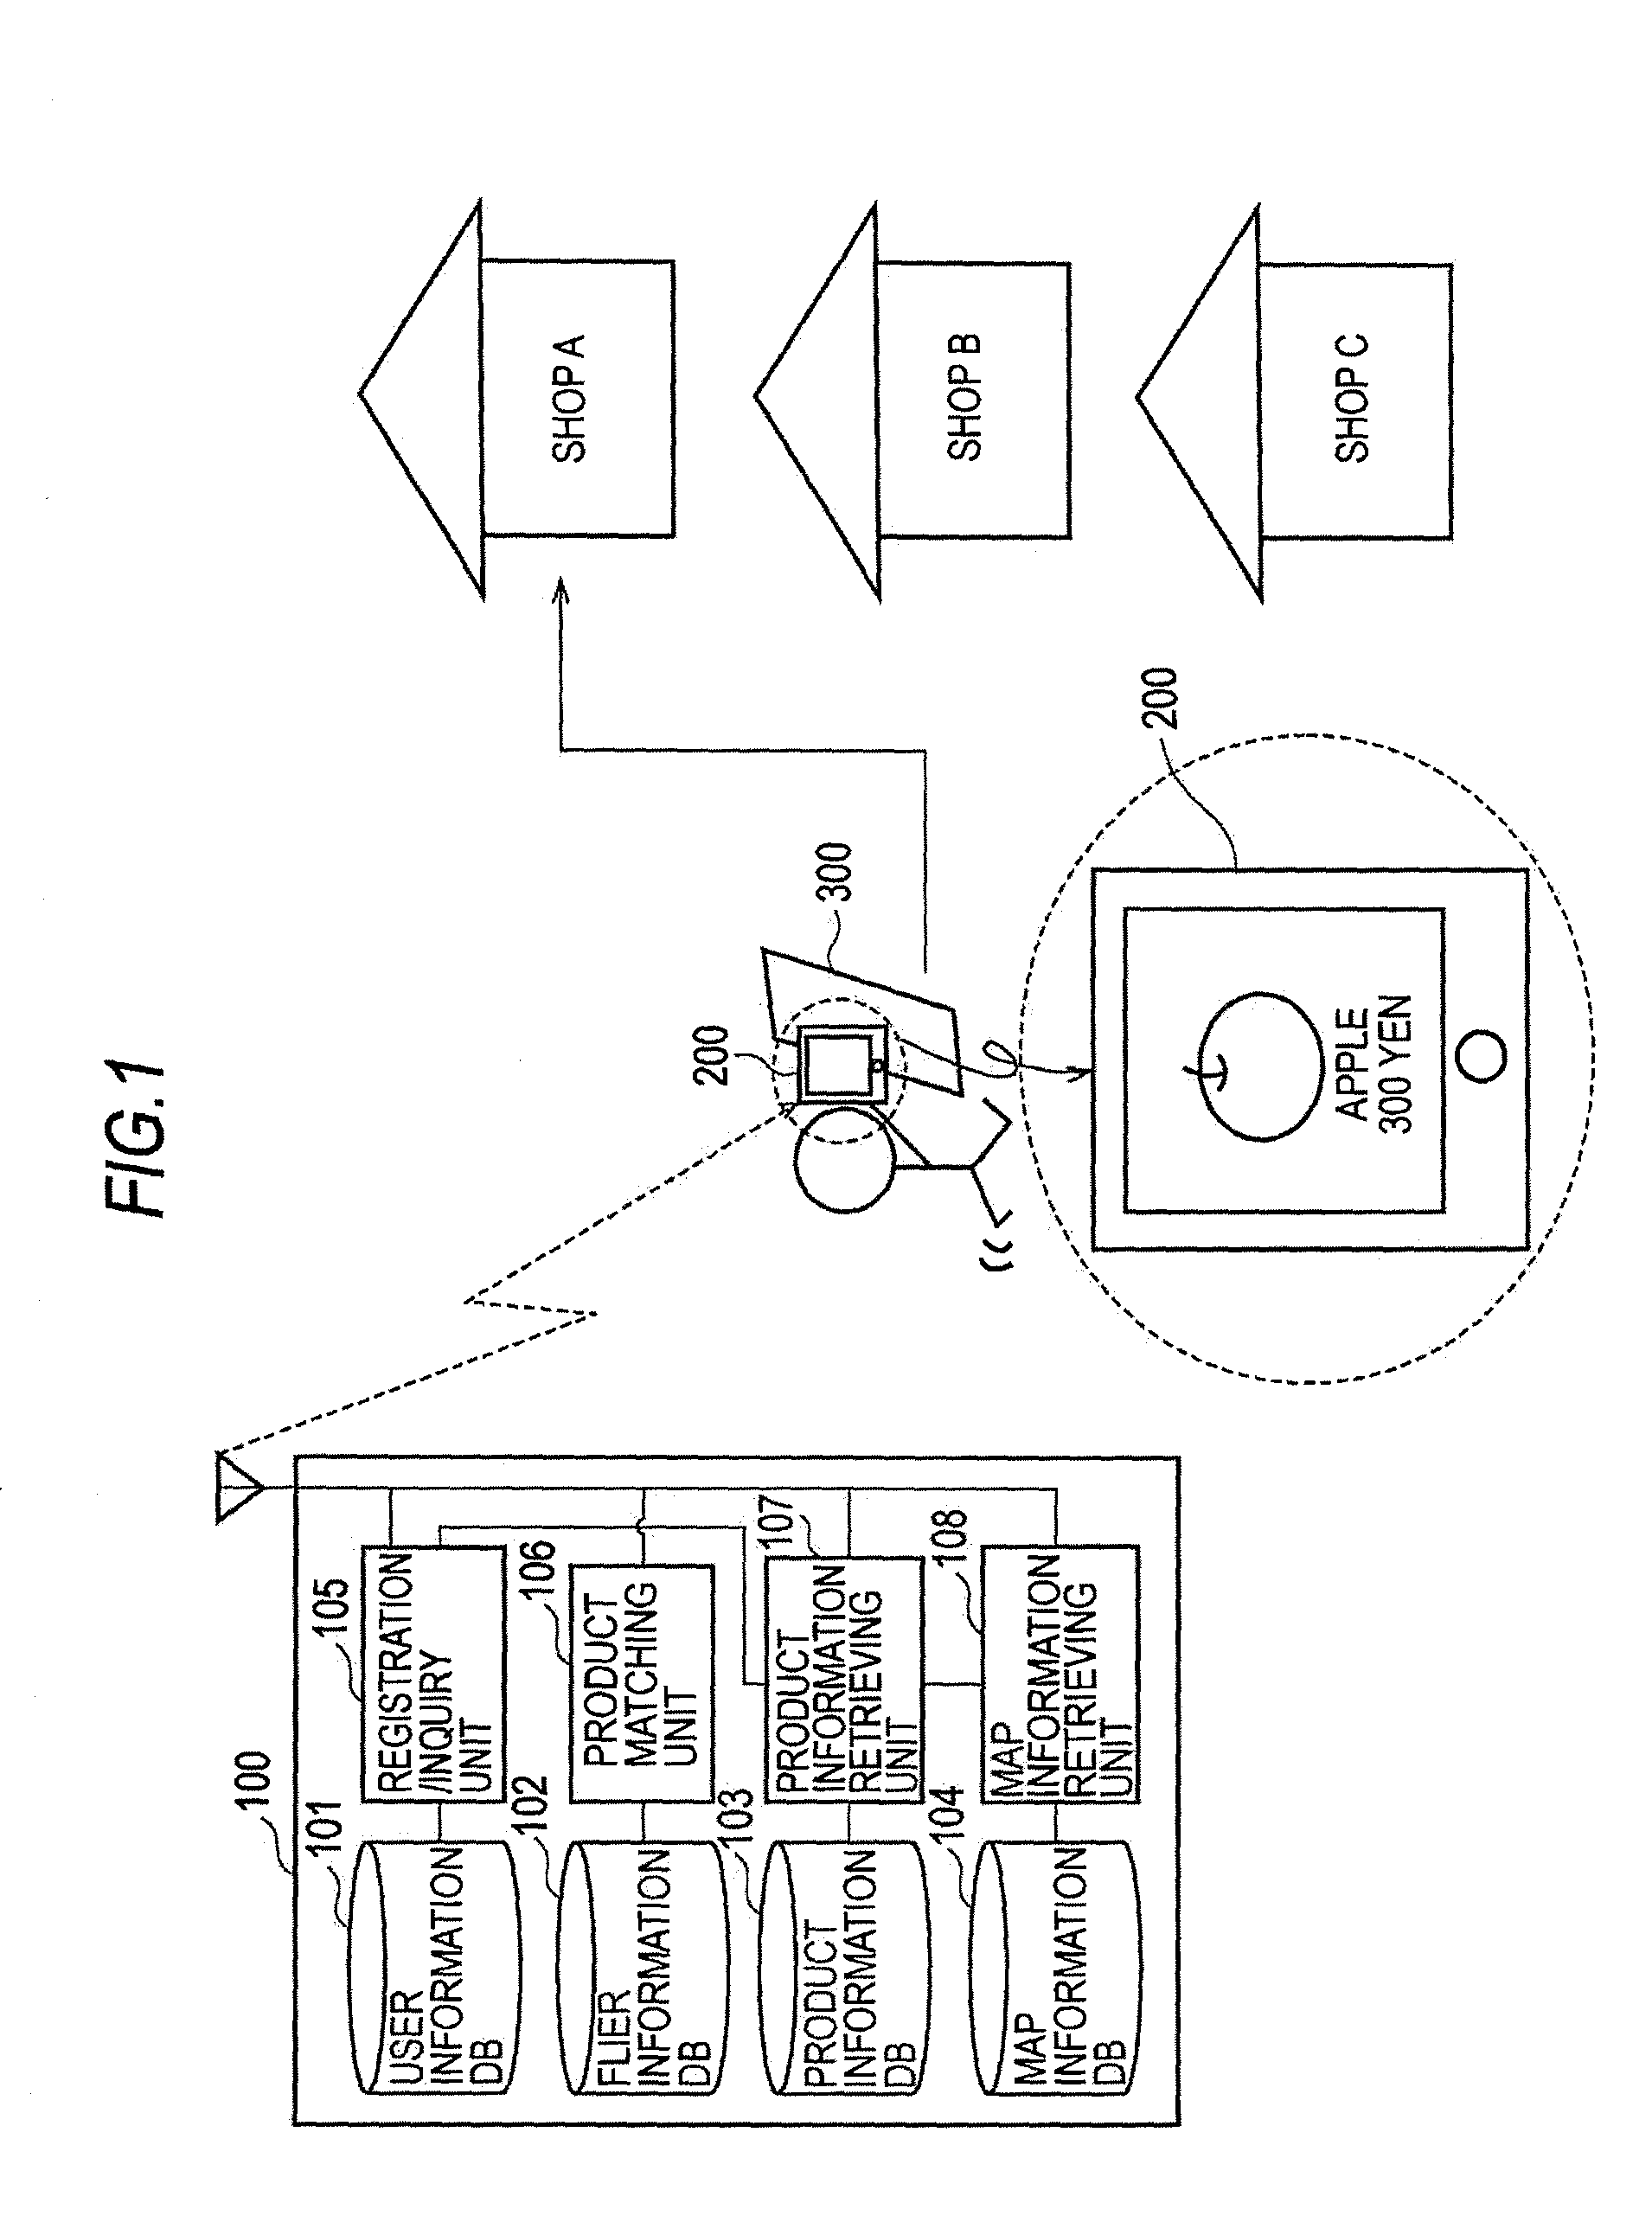 Information processing apparatus, information processing method and program, information processing apparatus, vacant space guidance system, vacant space guidance method and program, image display system, image display method and program